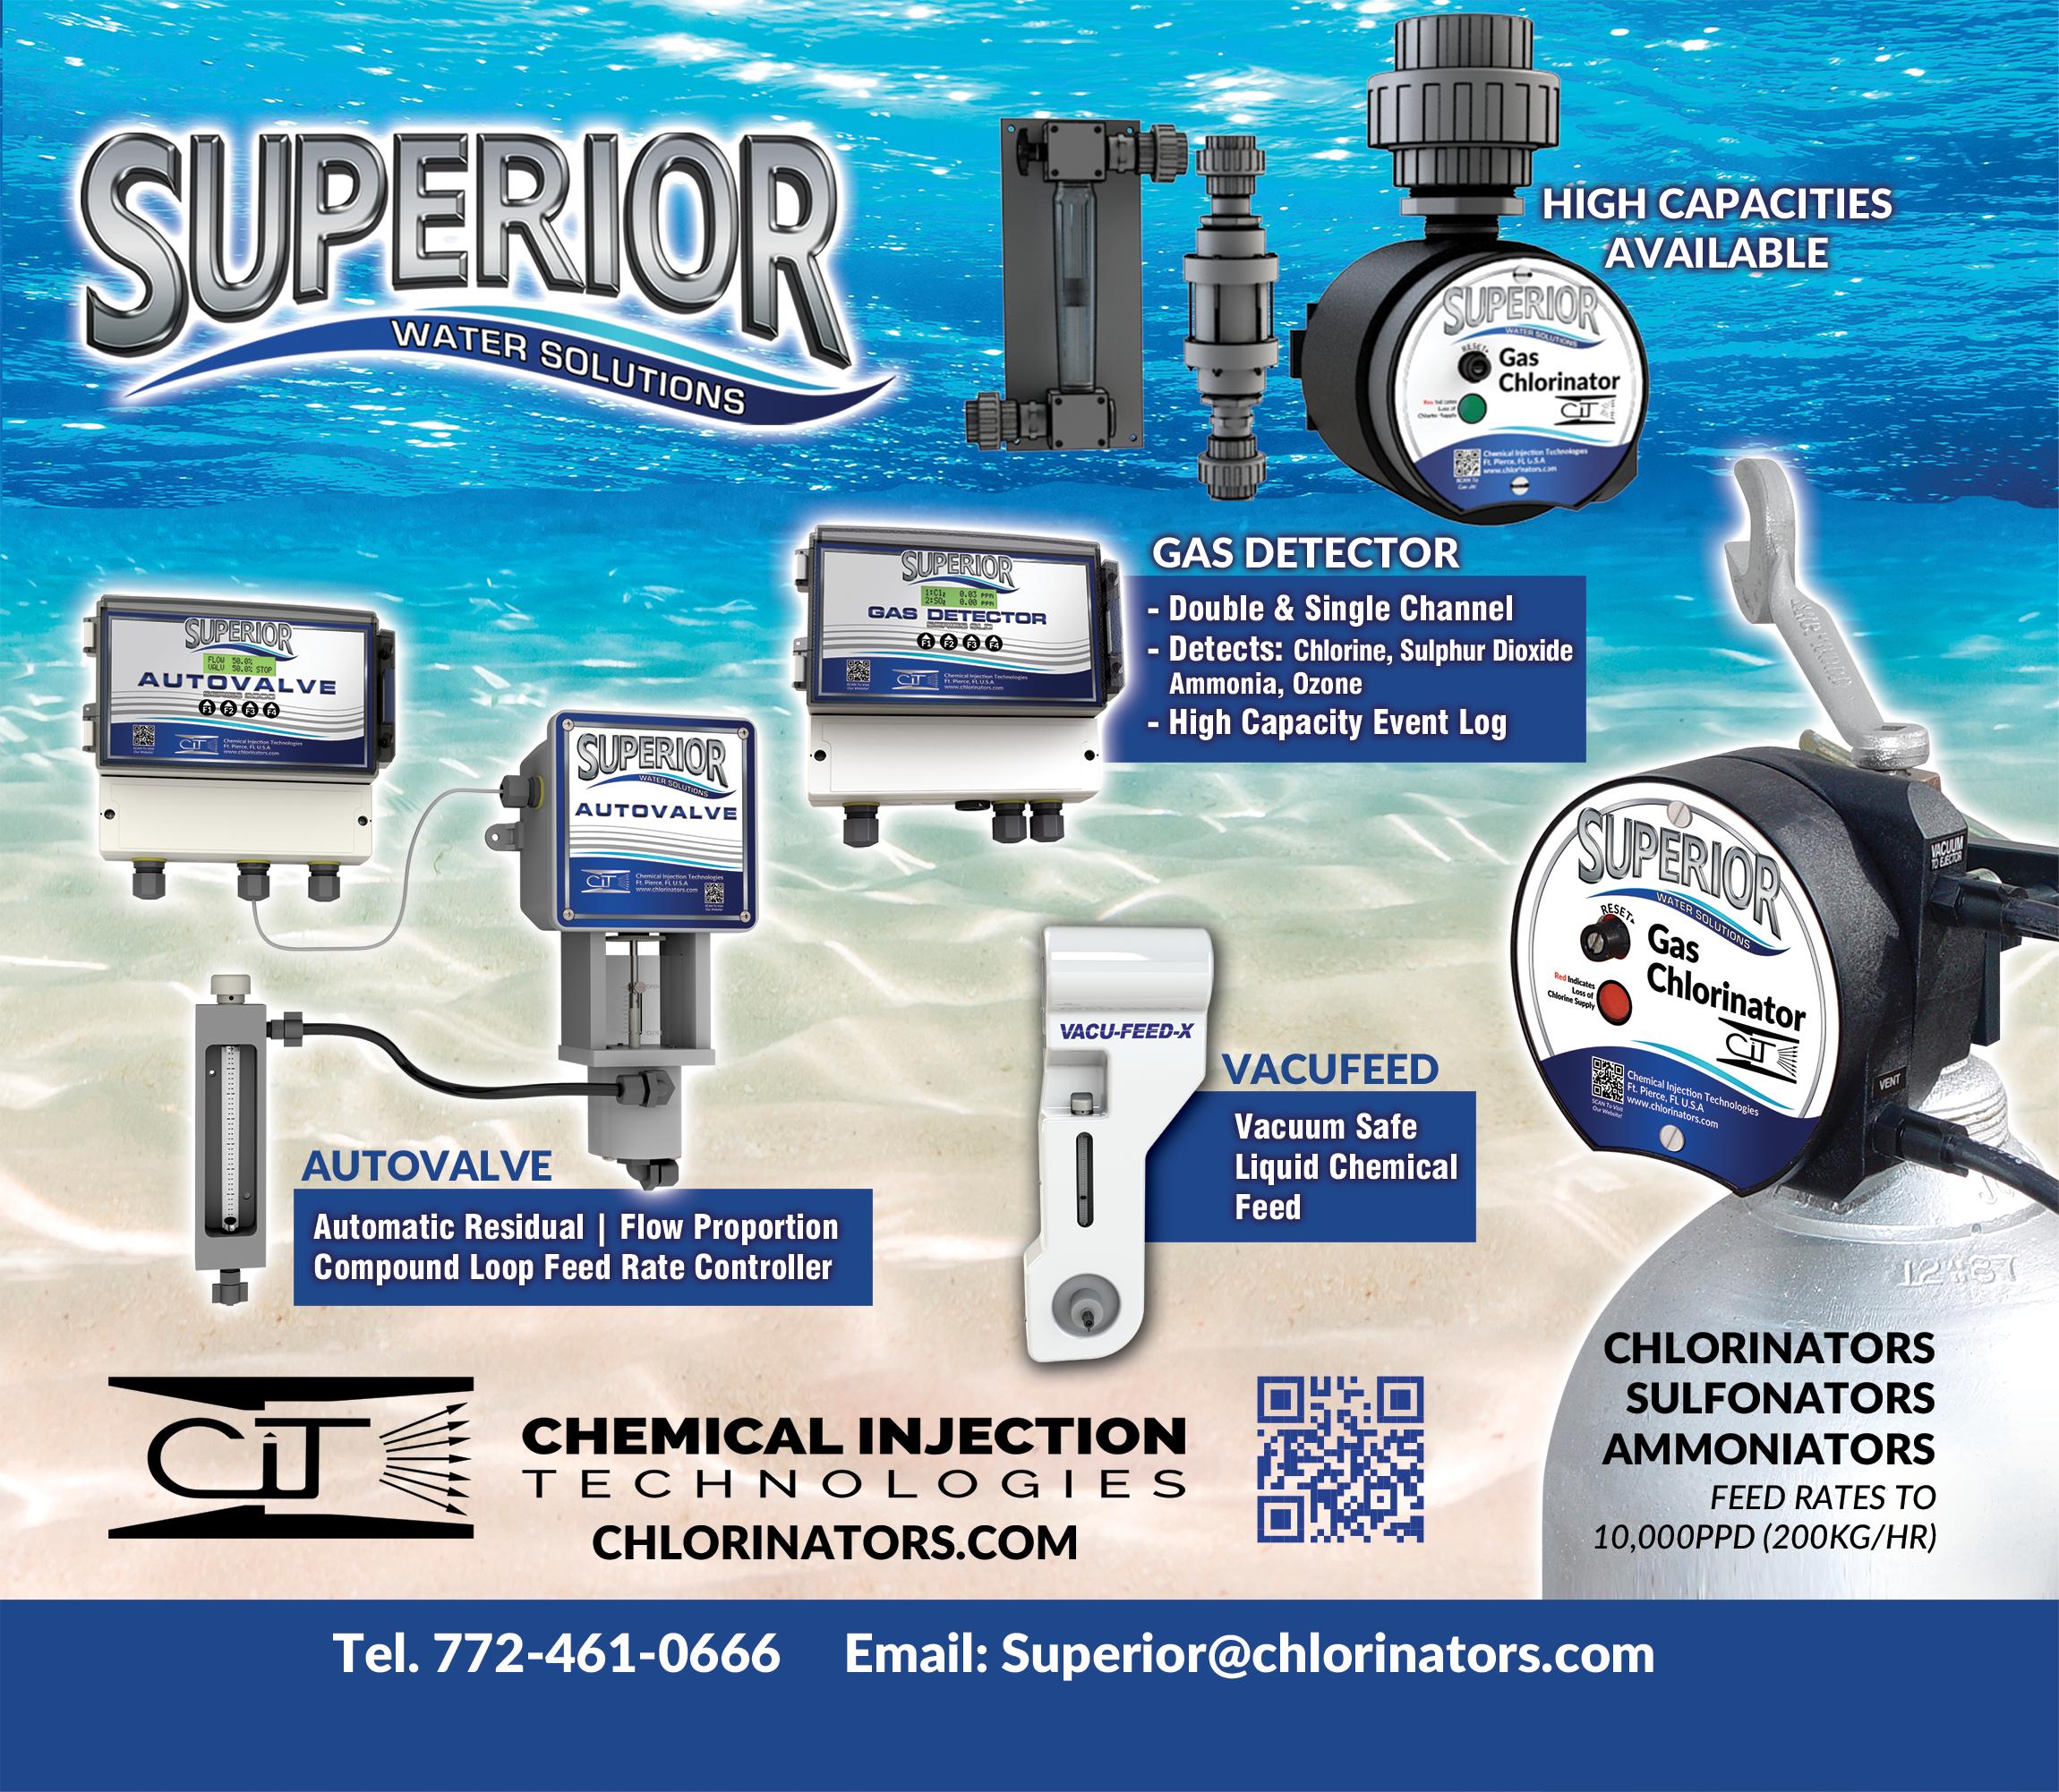 Superior gas chlorinator, chlorination, chlorine, sanitize, disinfect, irrigation, water treatment, control valve, analyzer, flow proportioning, wastewater plant, chemical feed pump, chicken process